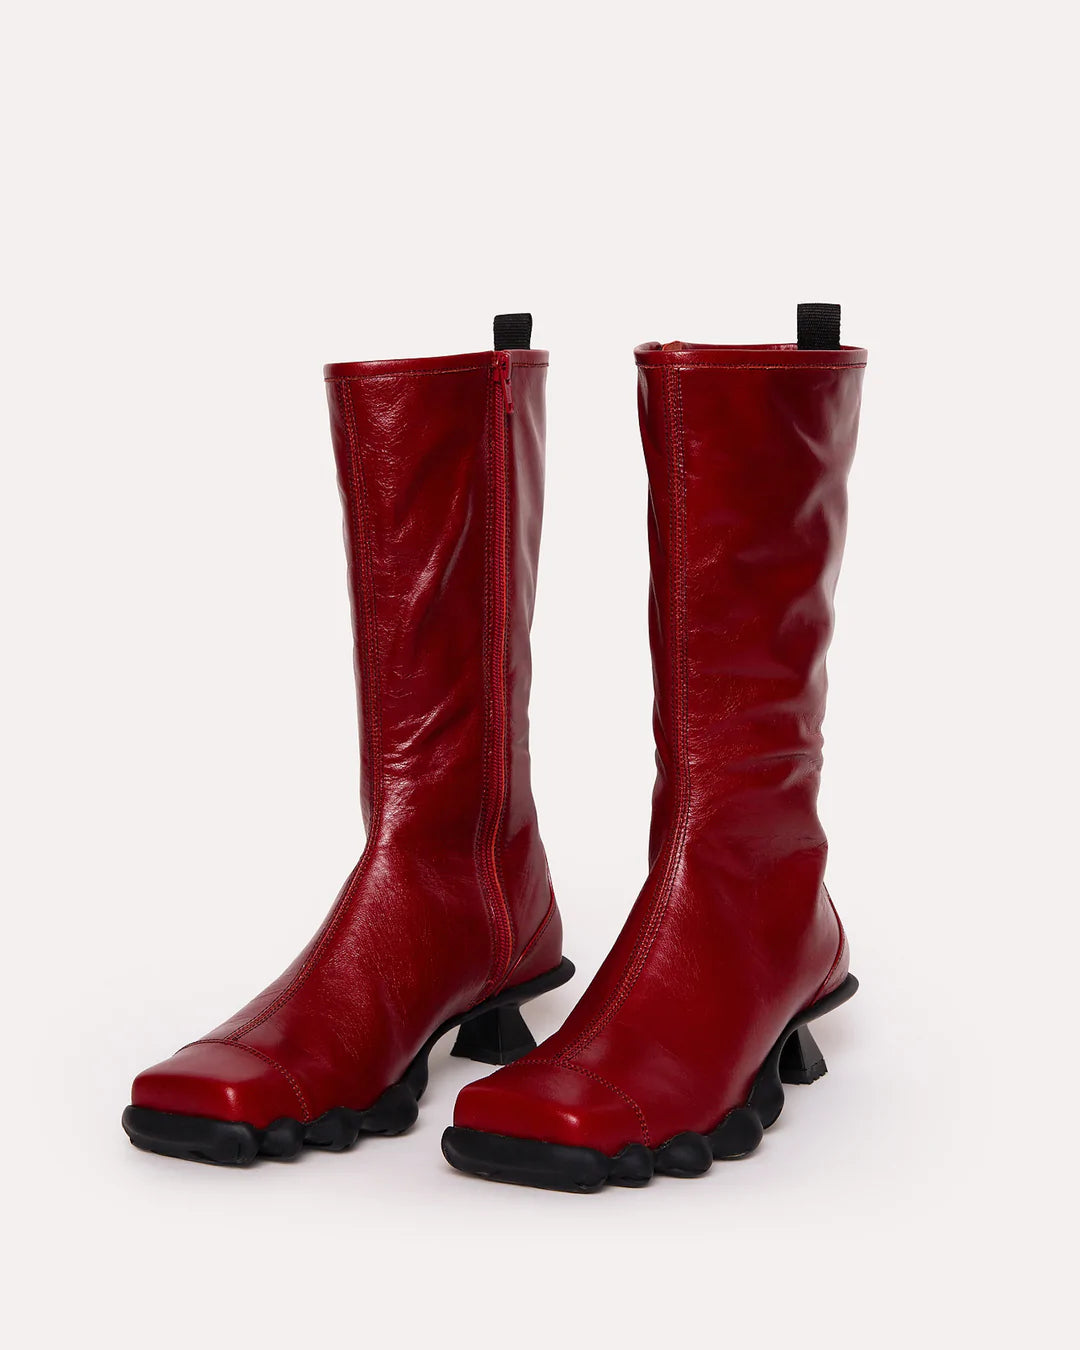 Dirt - Range Boot - Waxed Red